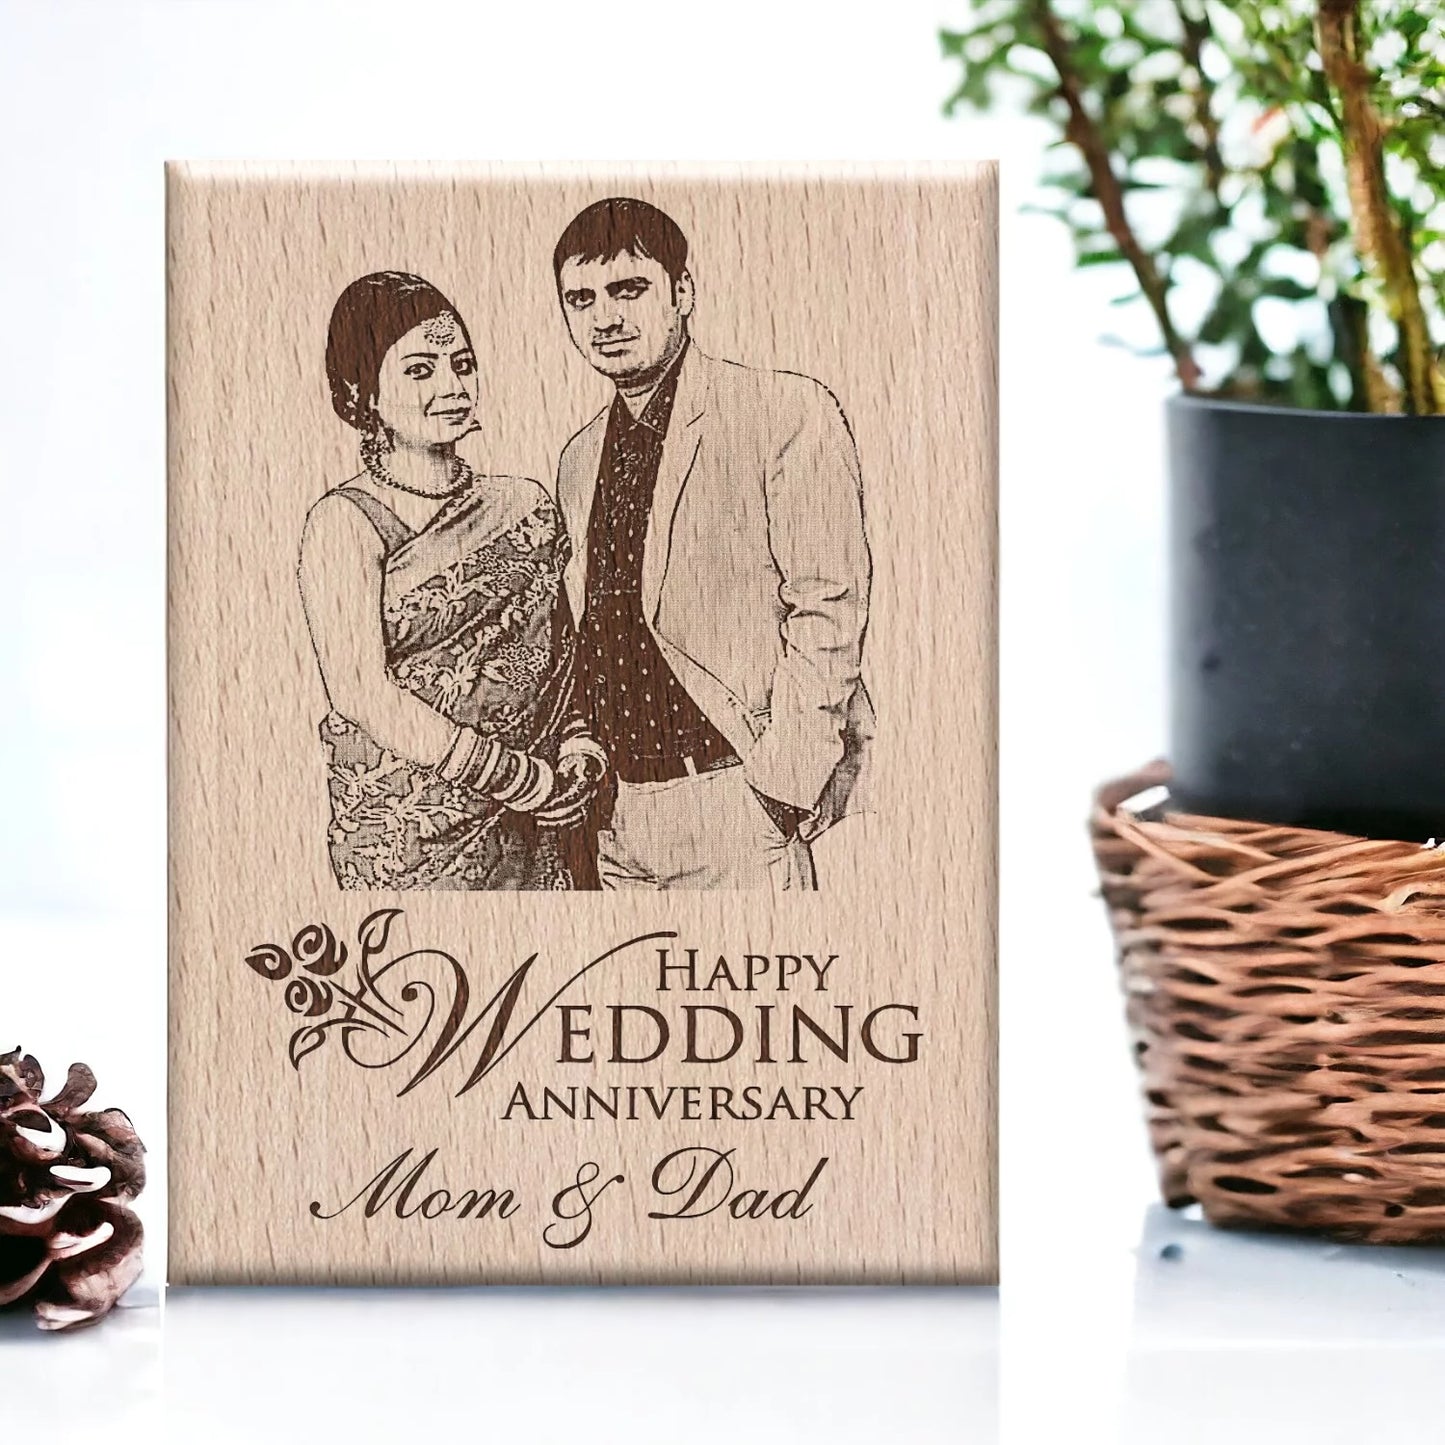 Customized Wooden Frame For Mom And Dad’s Anniversary